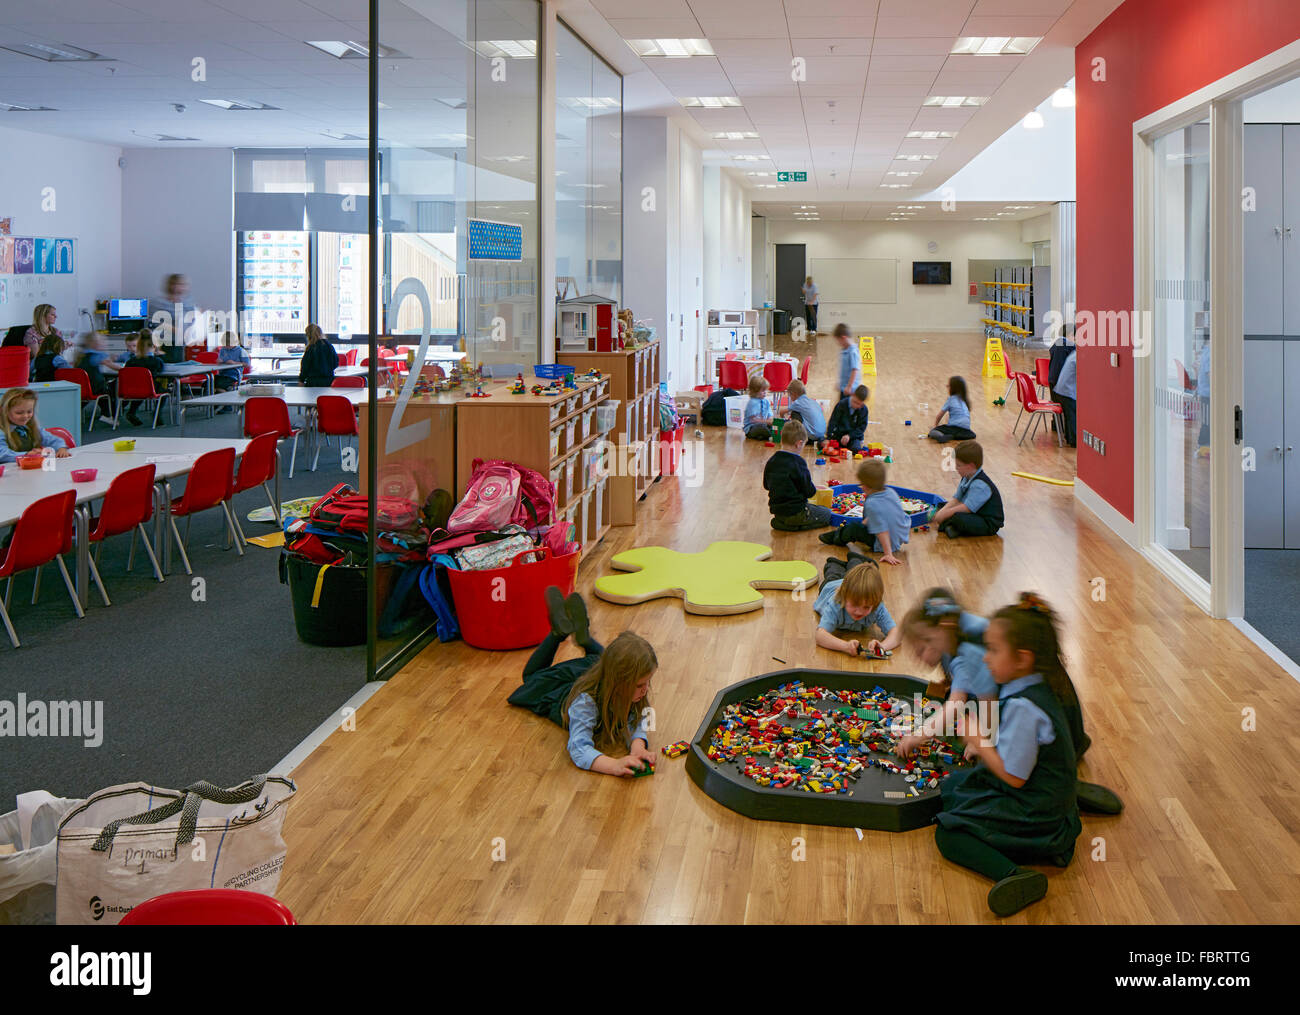 Perspective of circulation space and open classrooms. Lairdsland Primary School, Kirkintilloch, United Kingdom. Architect: Walte Stock Photo